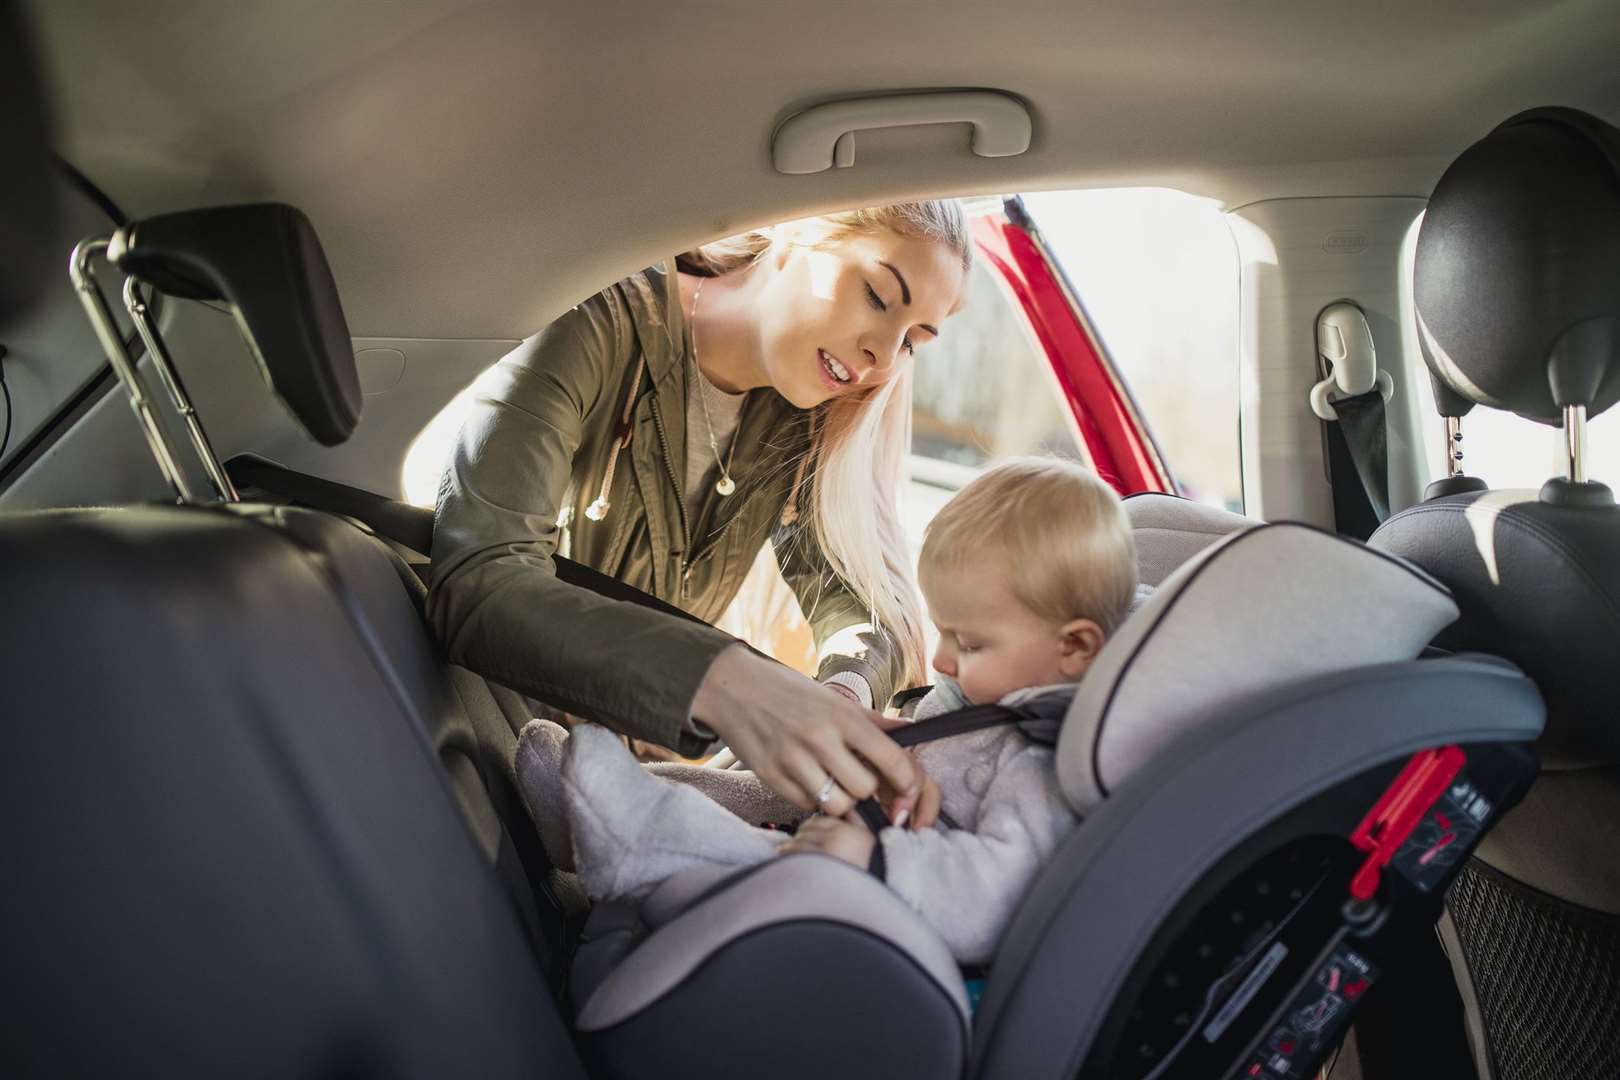 Parents risk a hefty fine if their car seats and children aren't secured correctly